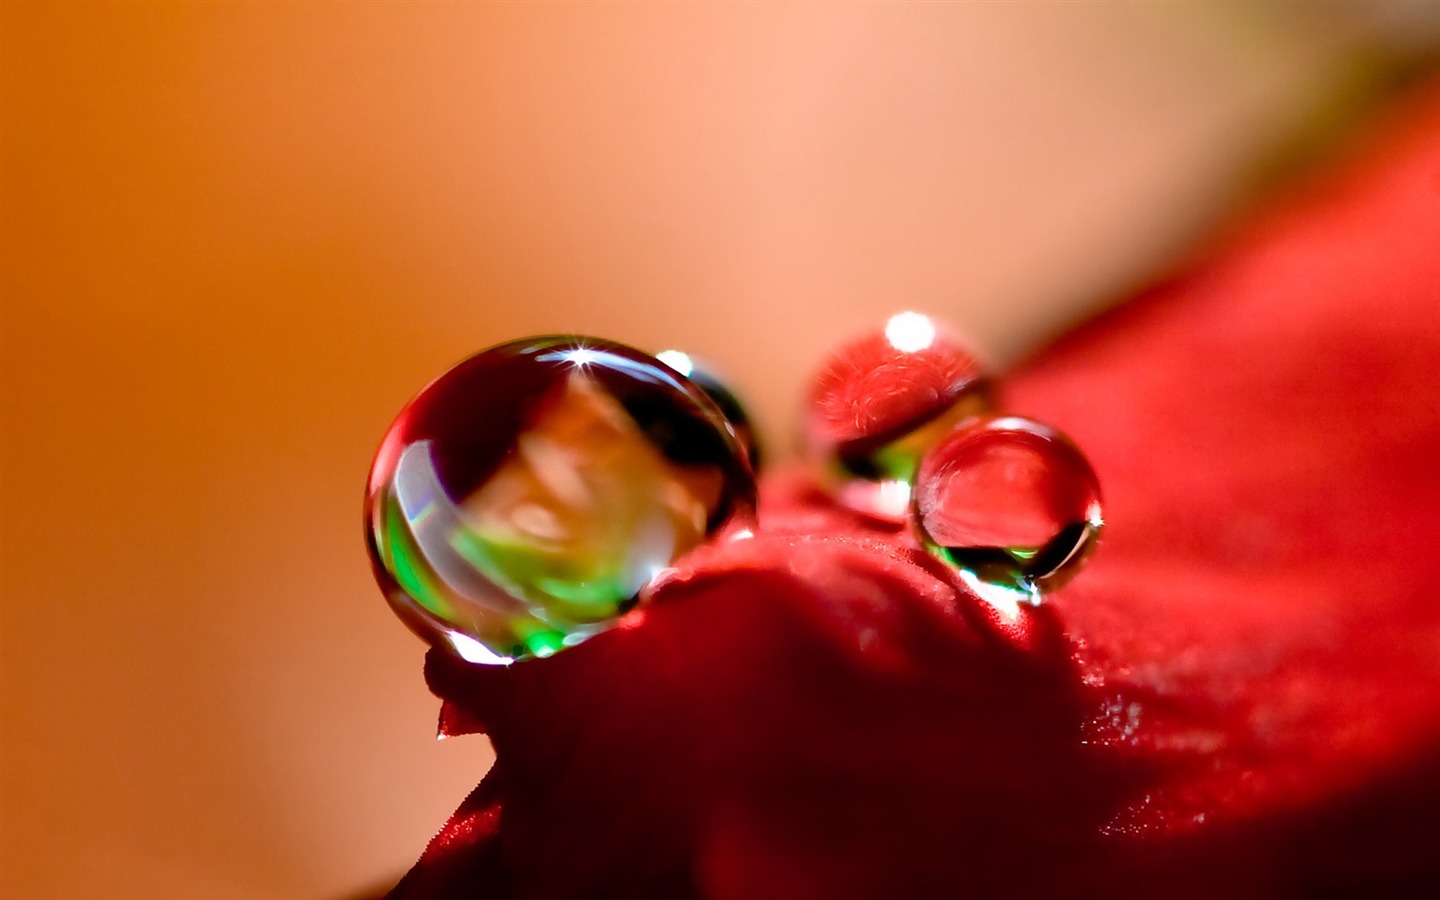 HD wallpaper flowers and drops of water #4 - 1440x900